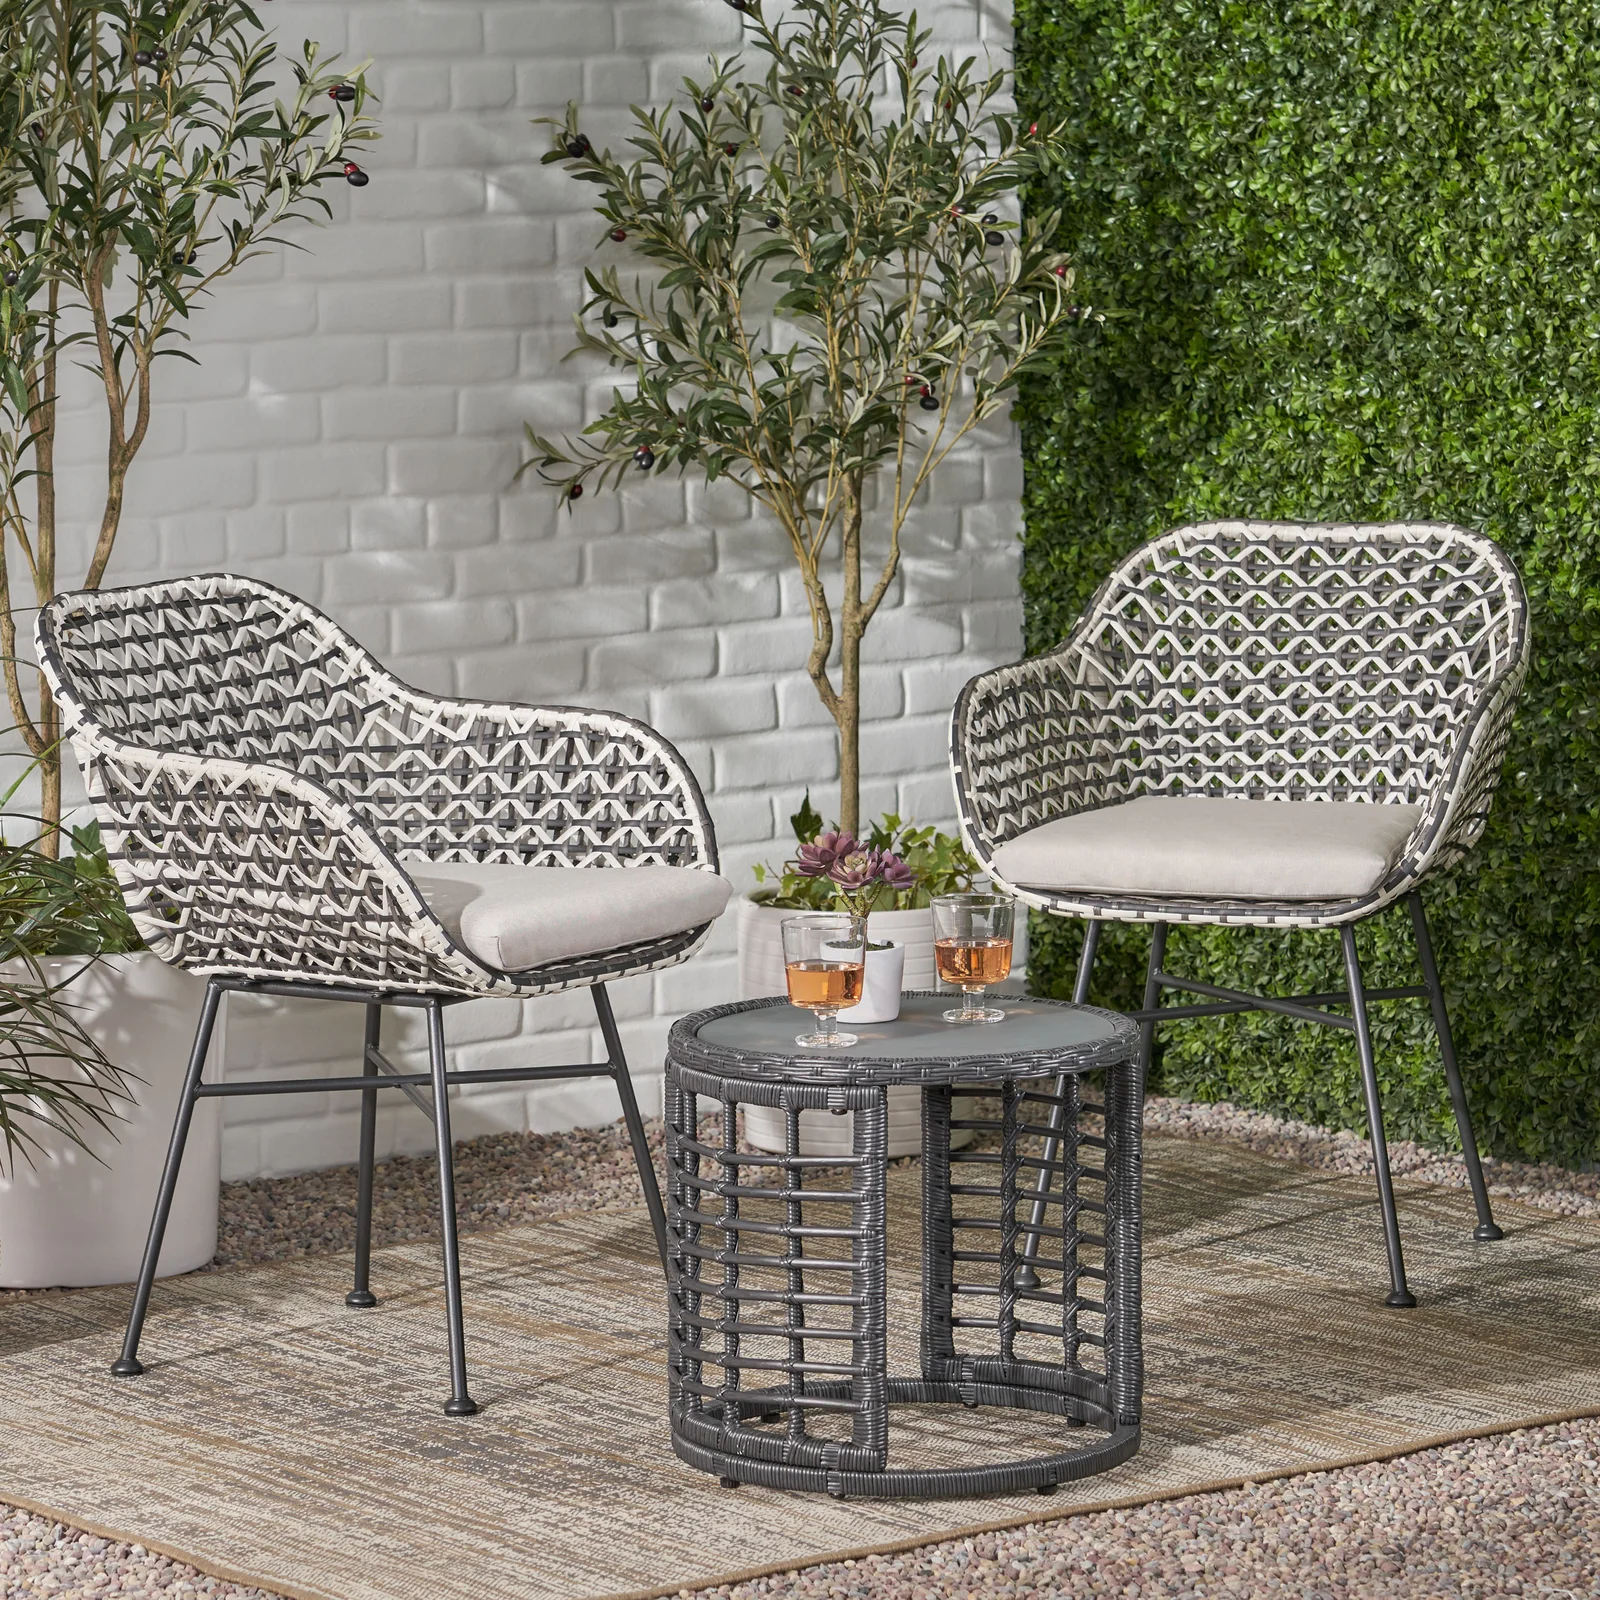 Freddie Outdoor Patio Seating Set 2 Chairs and 1 Table Set (White + Black)